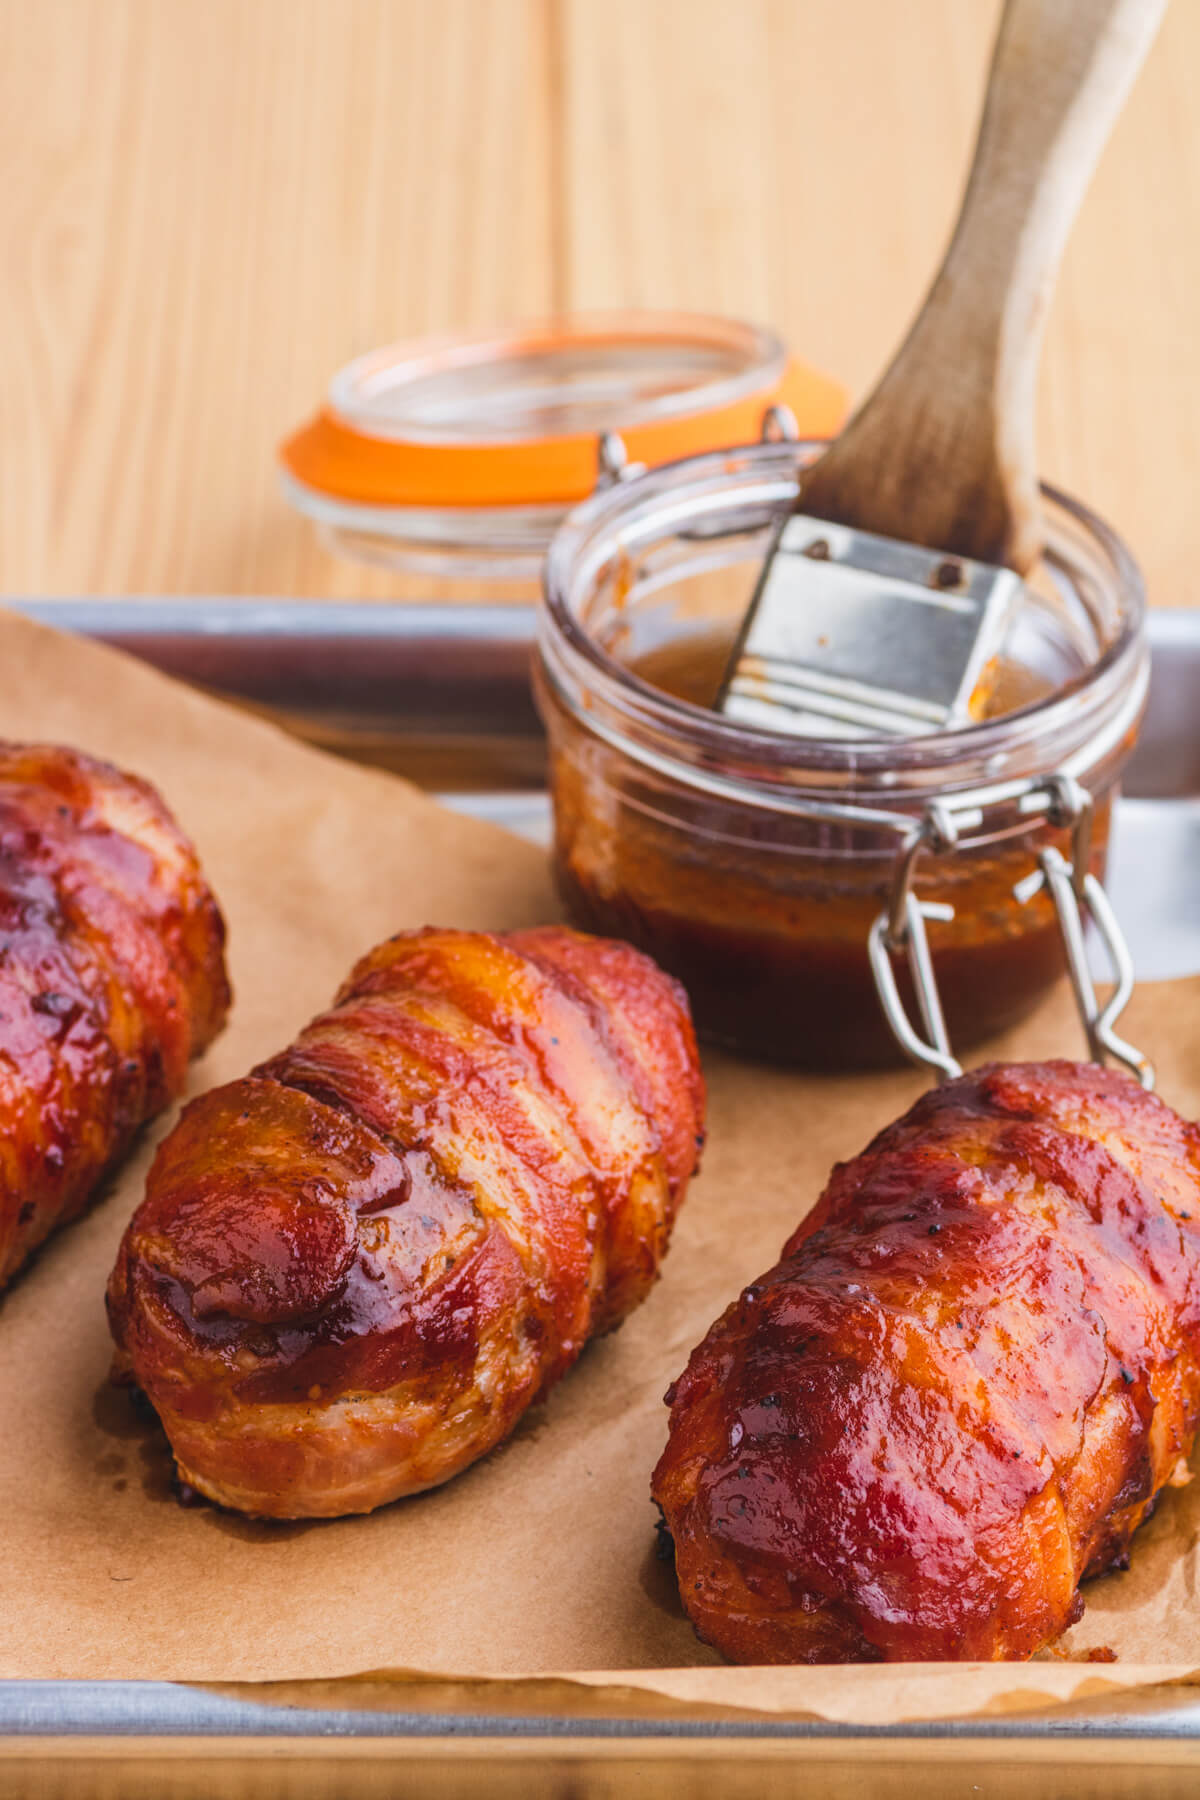 Three bacon wrapped and glazed Armadillo Egg appetizers on butcher paper beside a jar of BBQ sauce and brush full of the same BBQ sauce.